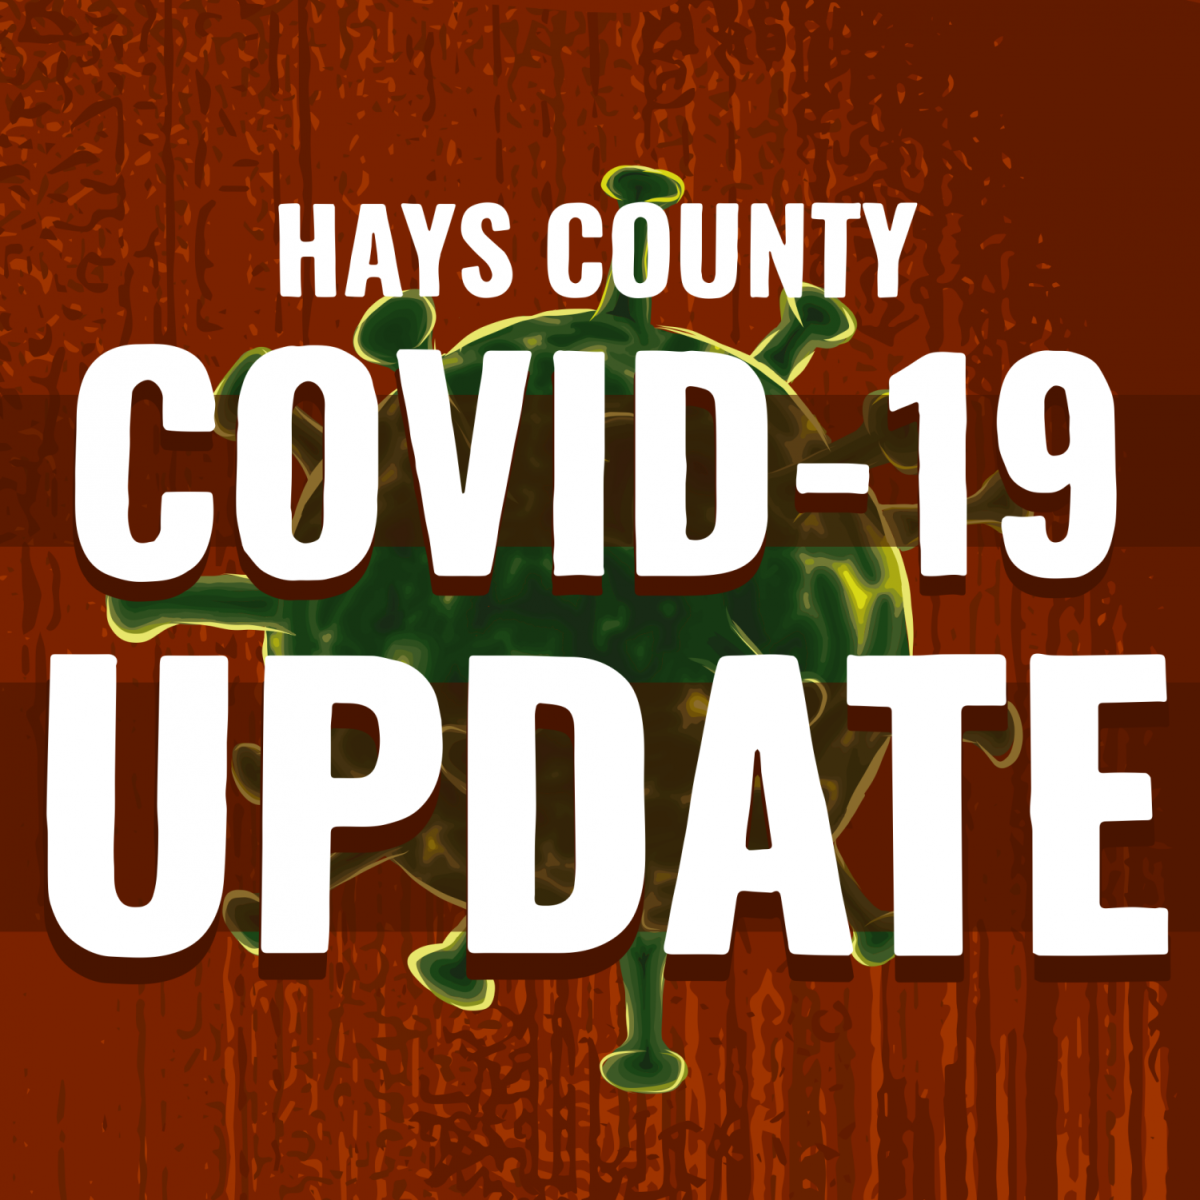 Hays County COVID-19 Update